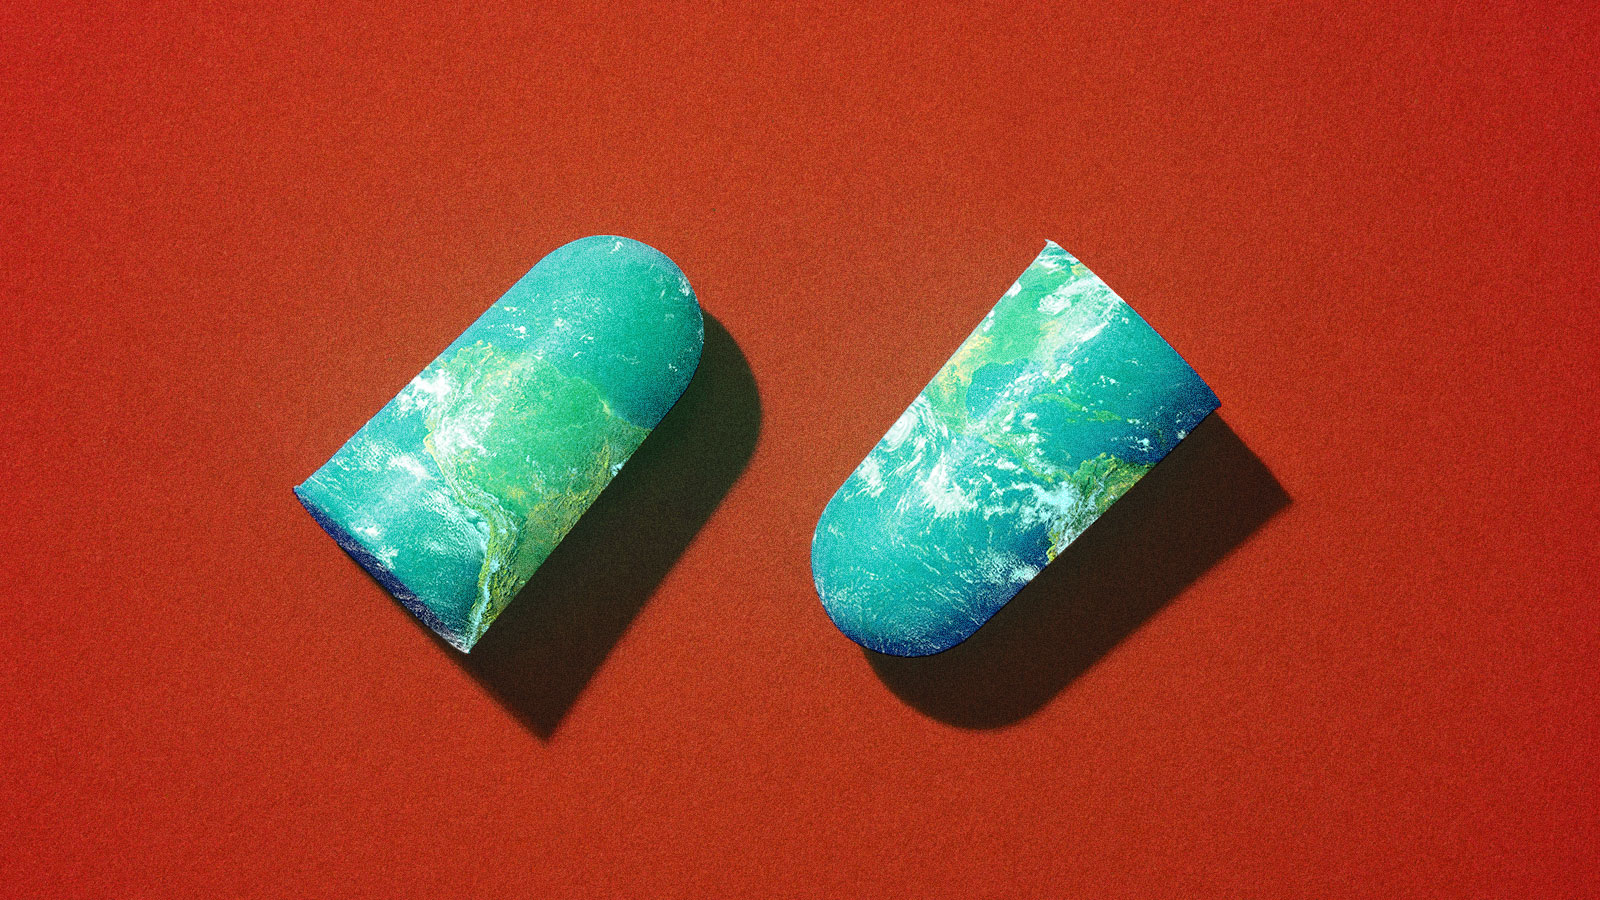 Earplugs with a pattern of planet earth on them